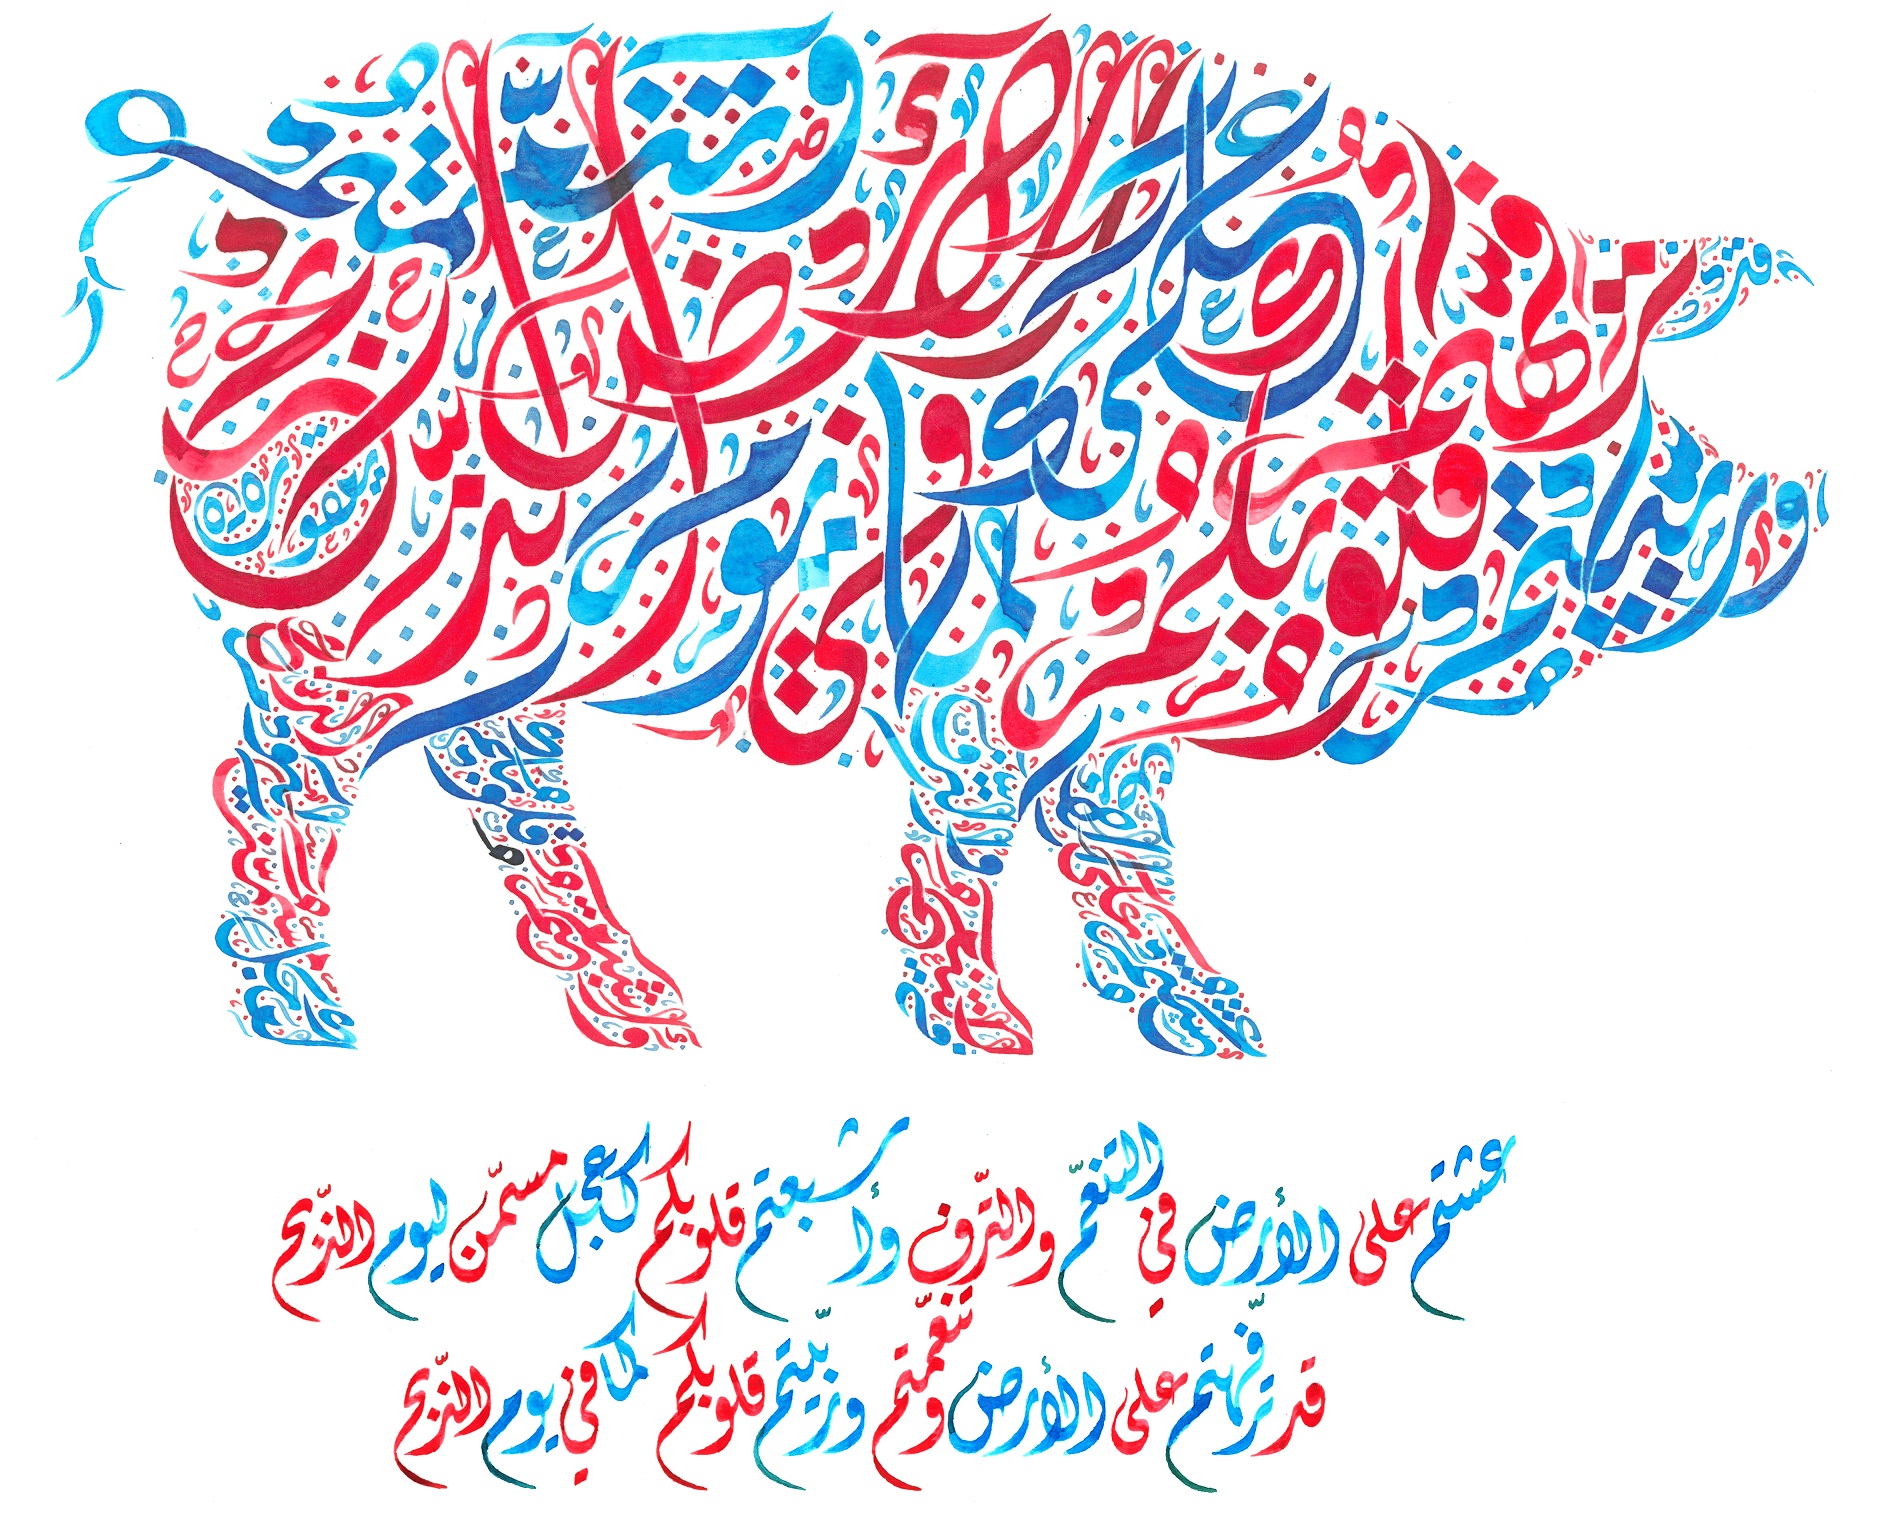 Pig for Slaughter - Original Arabic Calligraphy by Everitte Barbee